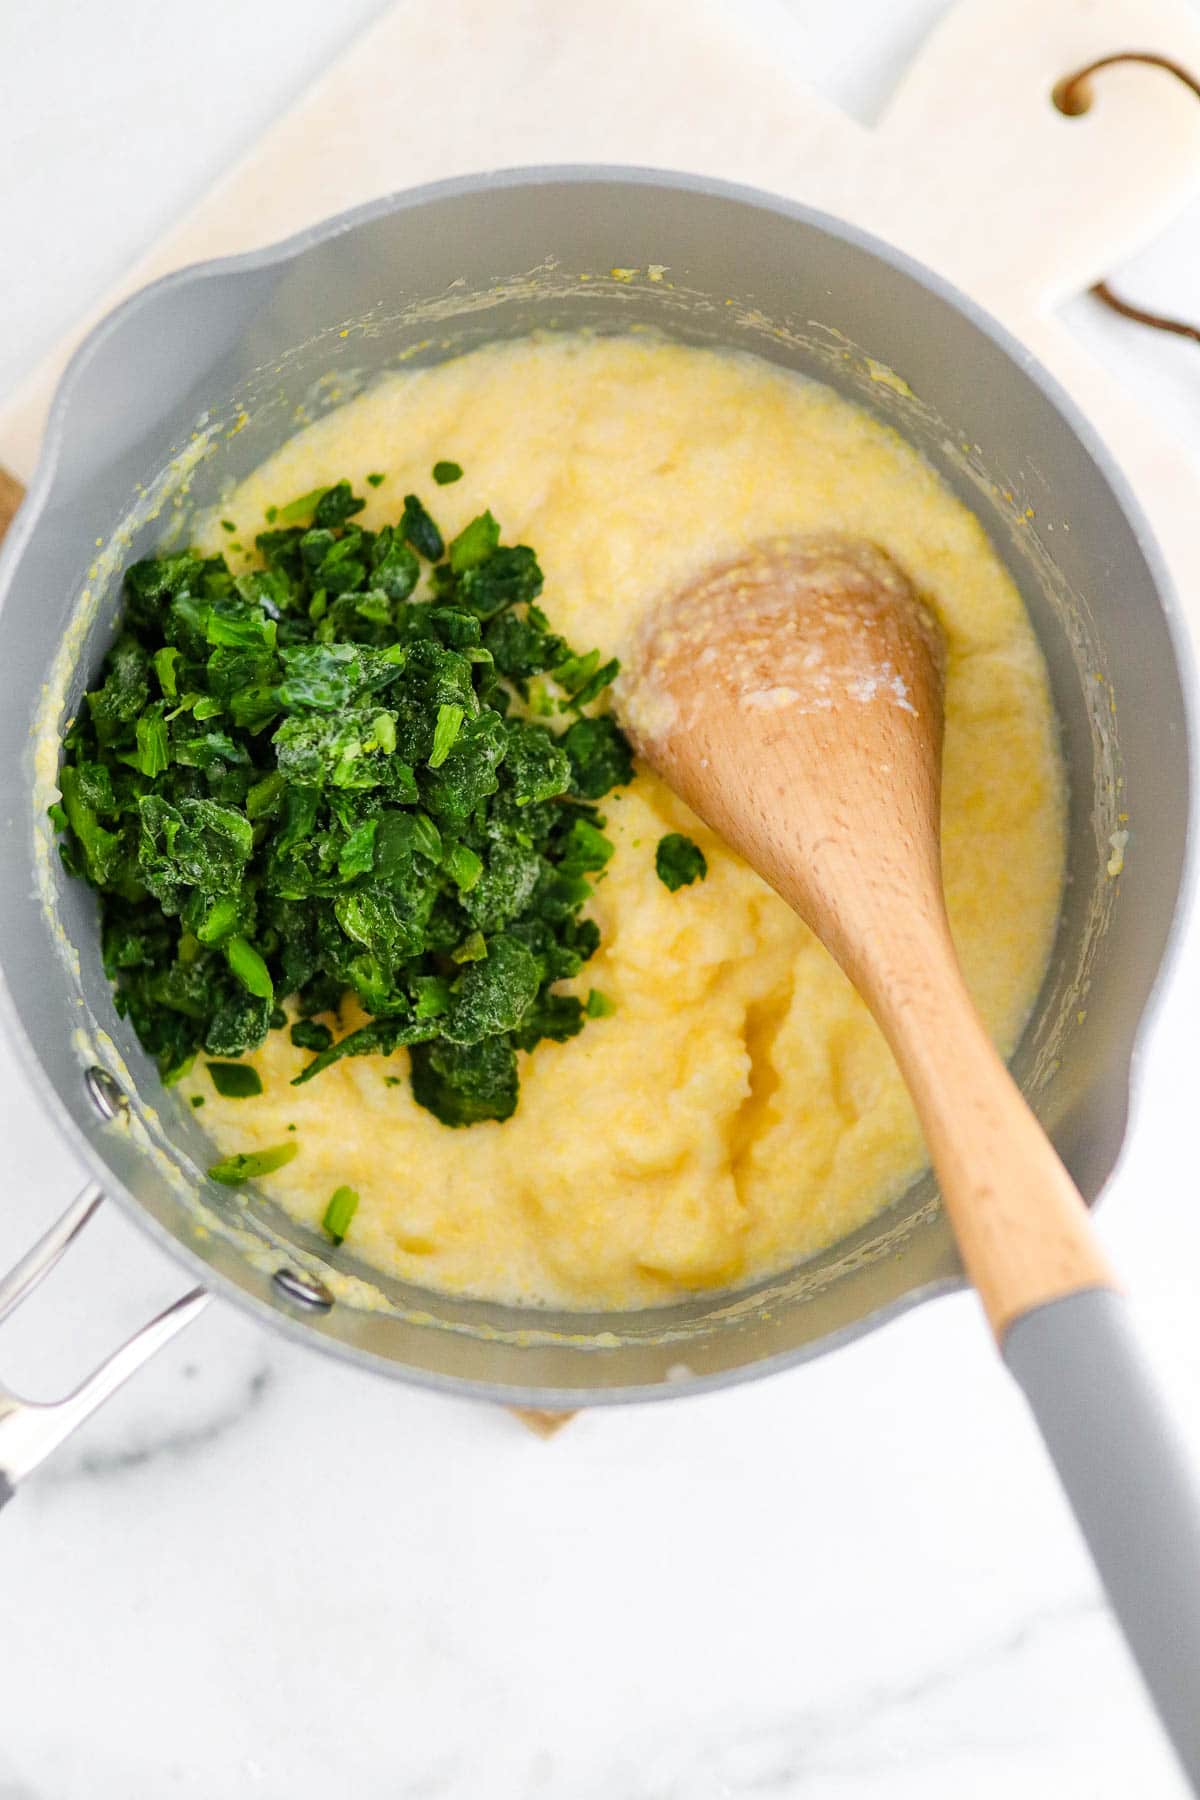 Polenta in the cooking process, adding spinach